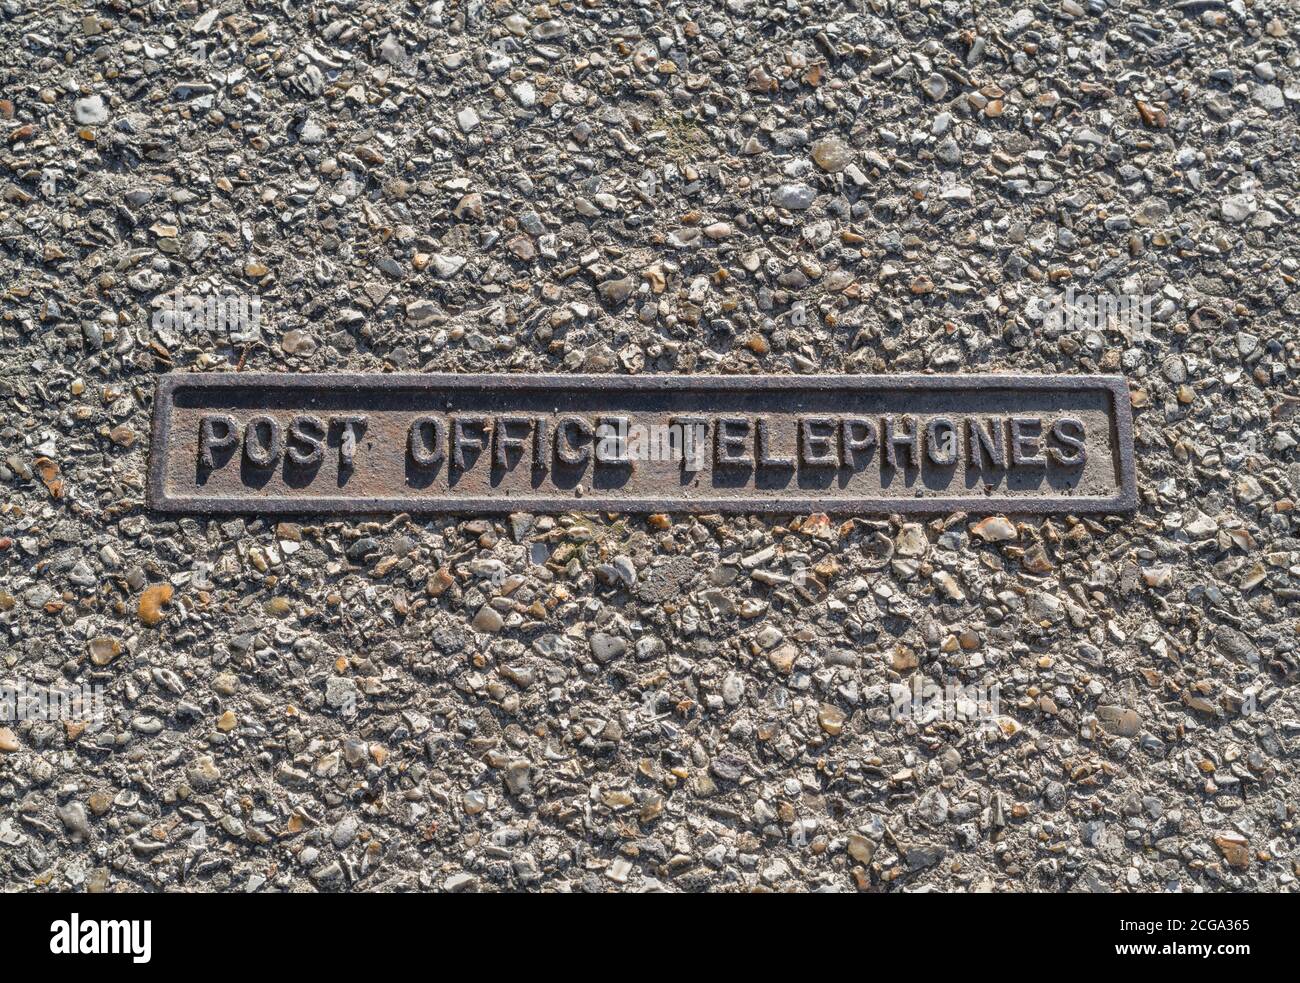 Pathway telephone line inspection cover from the old days when the Post Office Telephones had a monopoly on communications technology. Stock Photo